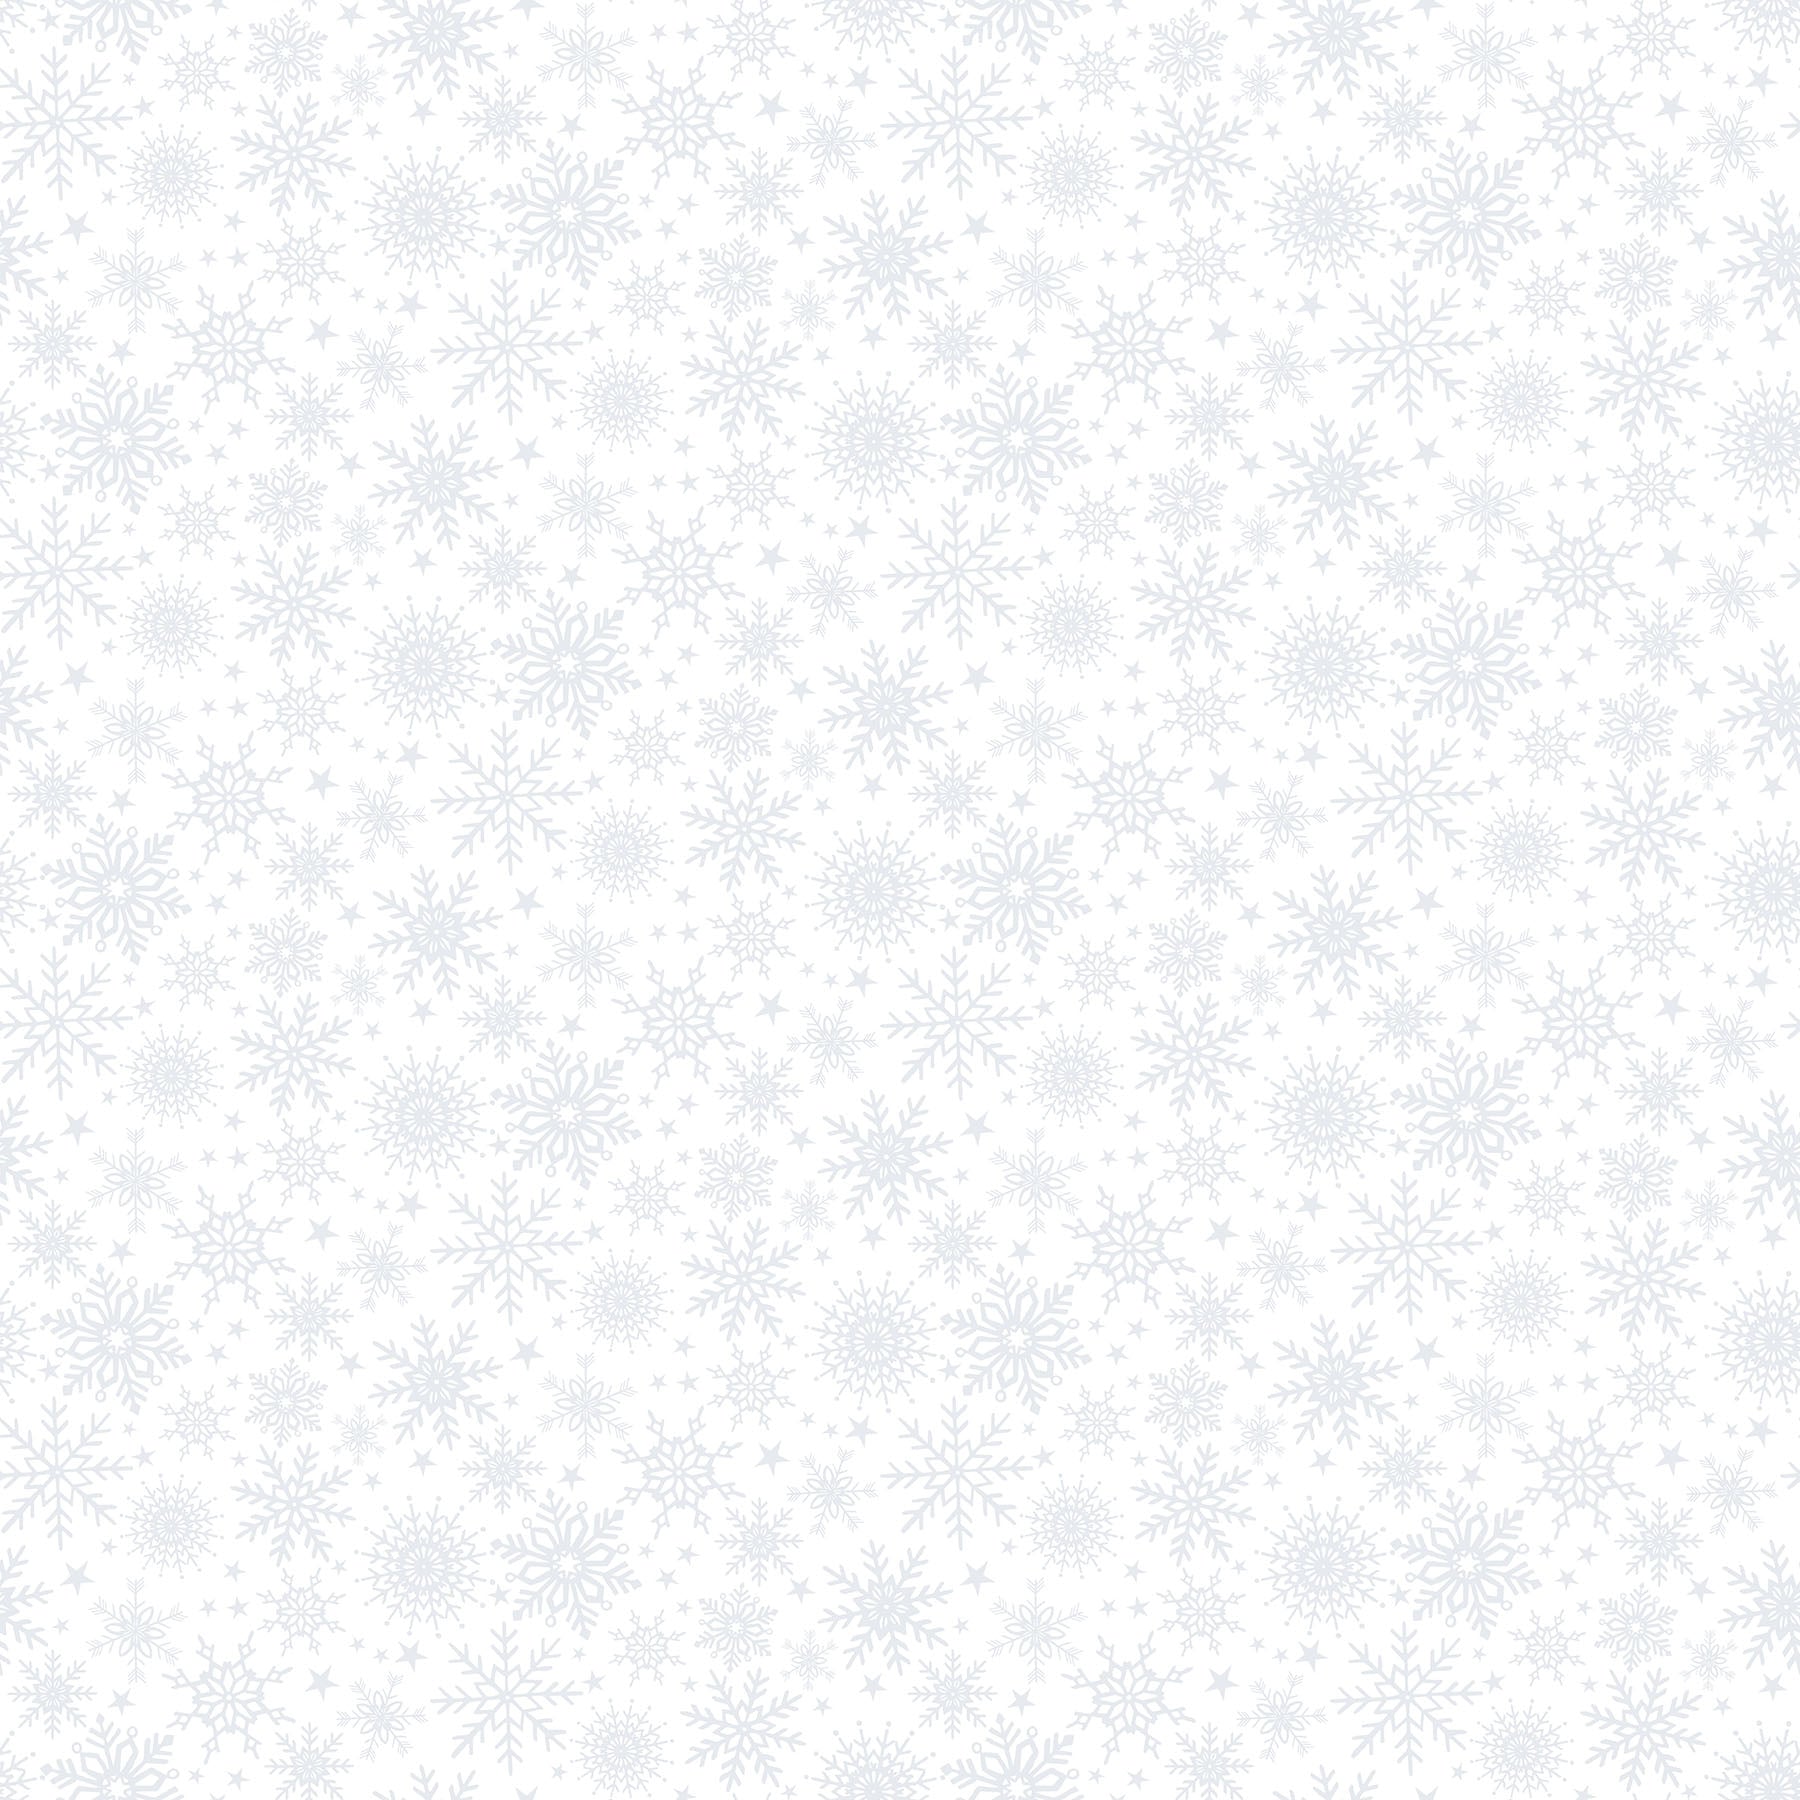 Northcott Fabric by the Yard Angels on High White Multi Snowflakes (DP25357-10)